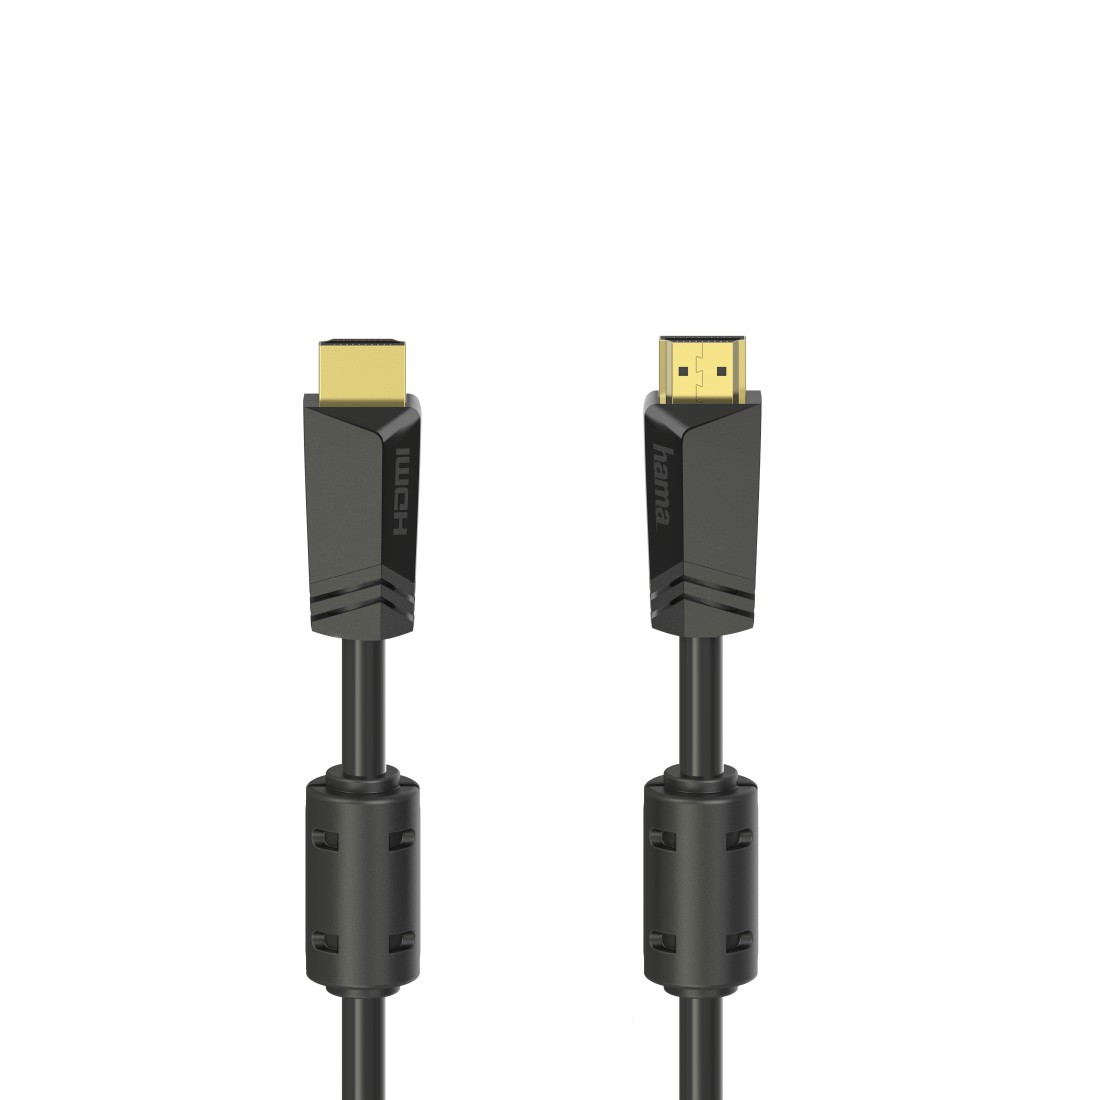 00205009 Hama High-speed HDMI™ Cable, Plug - Plug, 4K, Ethernet,  Gold-plated, 10.0 m